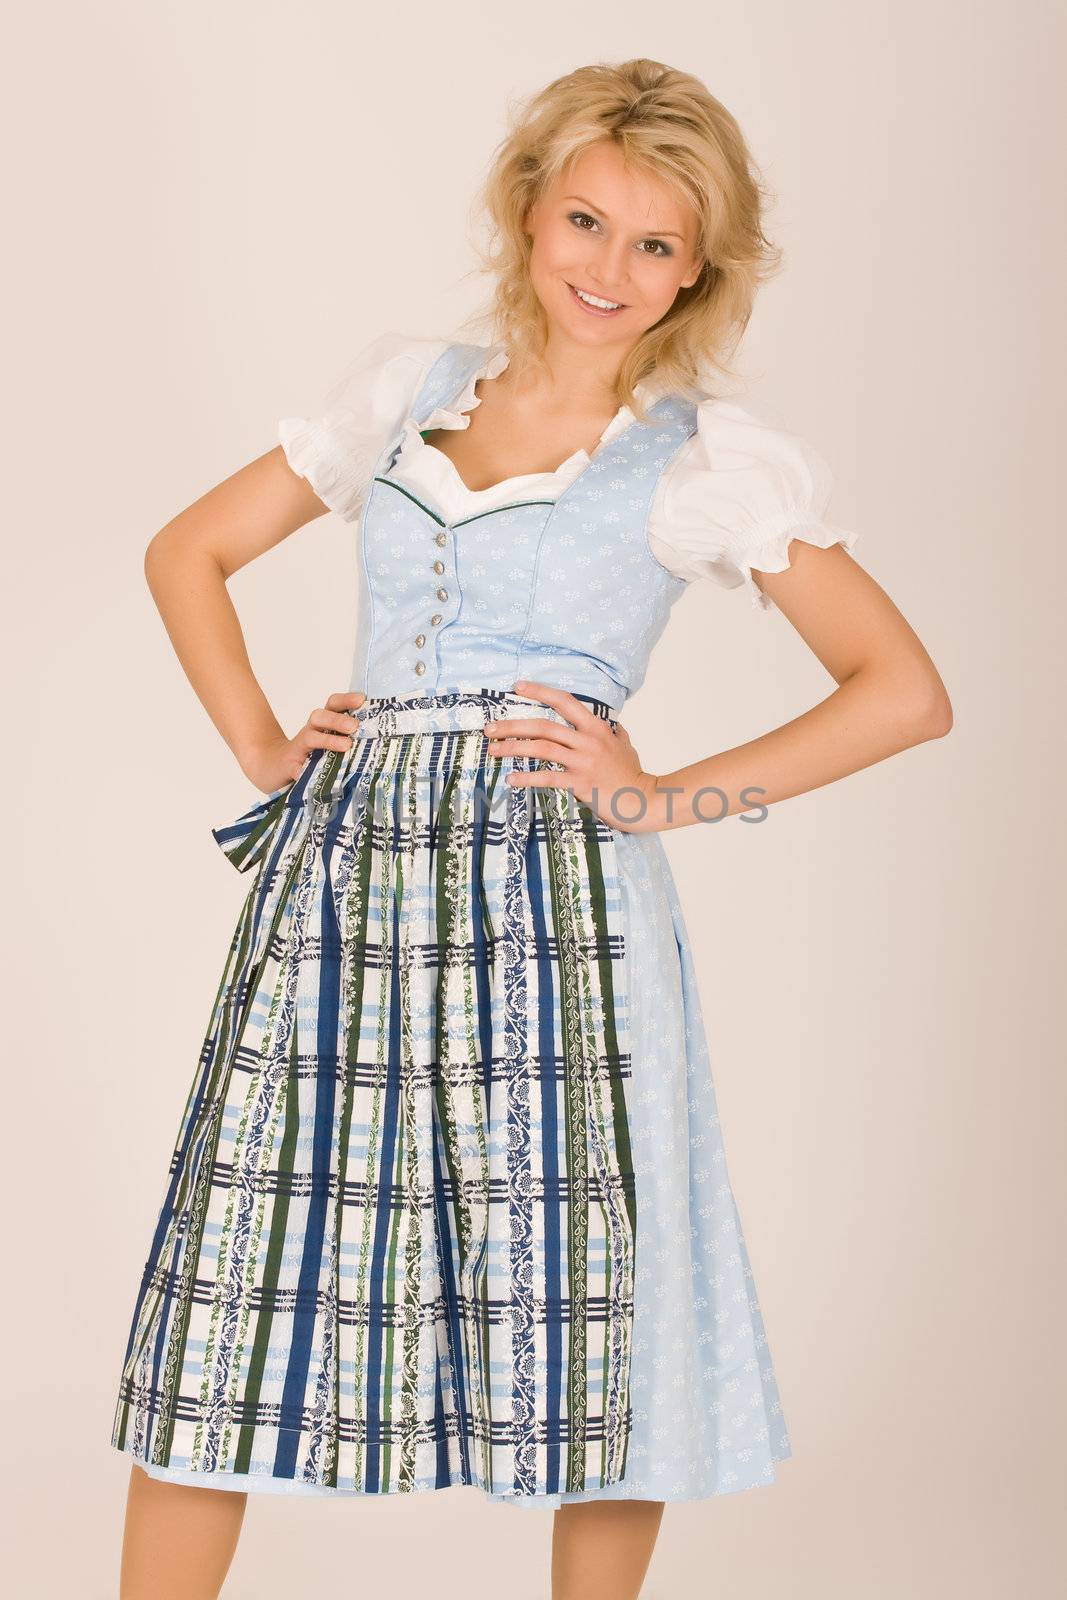 Bavarian beauty in costume by STphotography